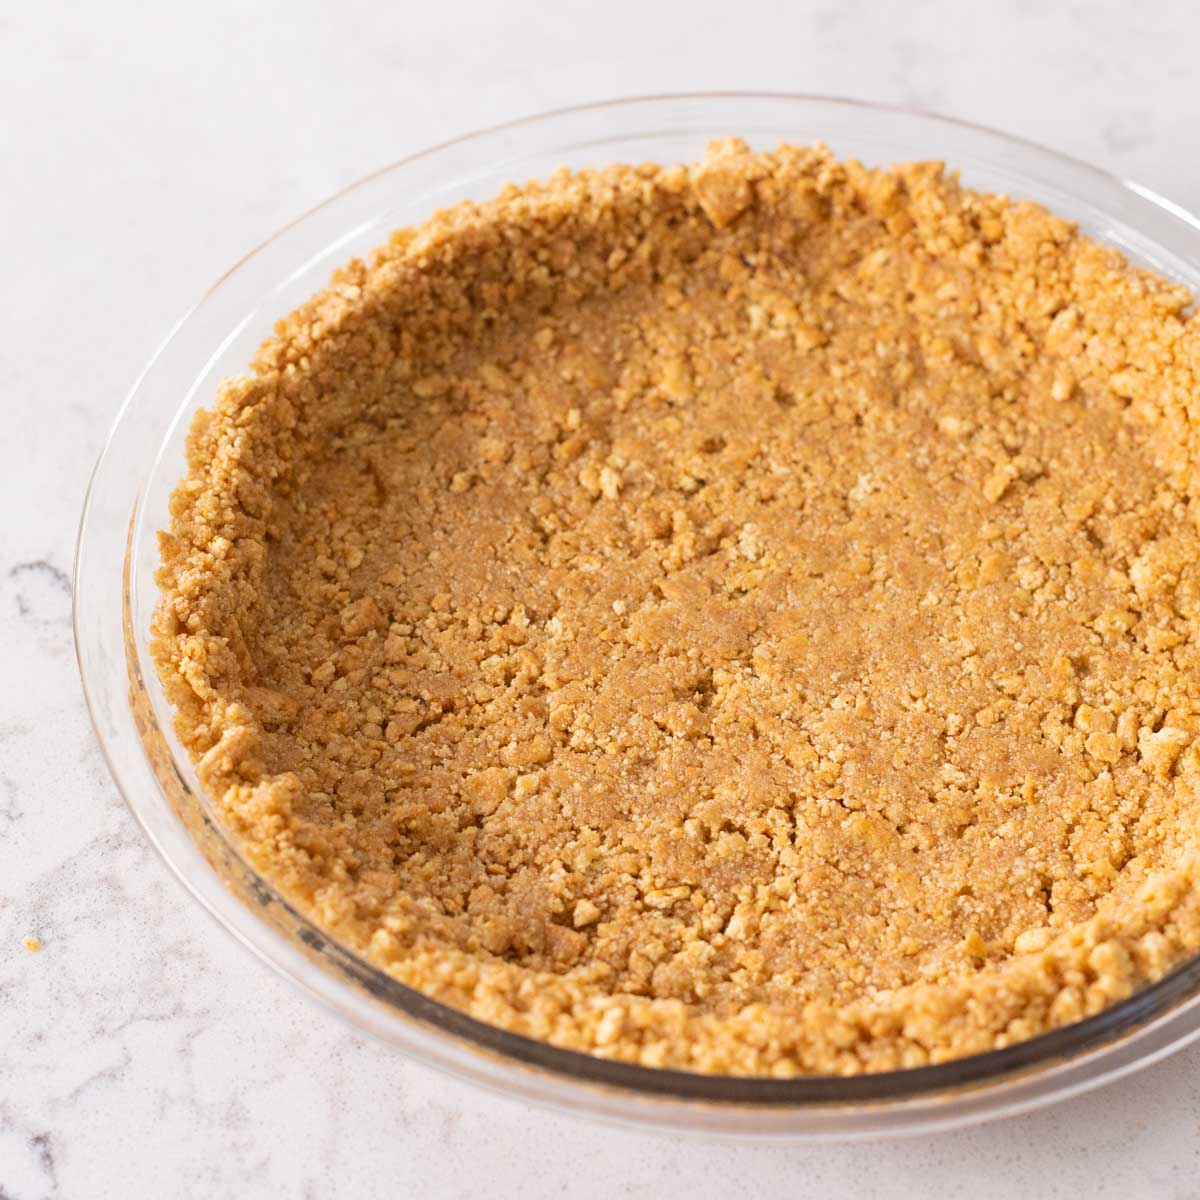 A graham cracker crust in a clear pie plate sits on the kitchen counter.